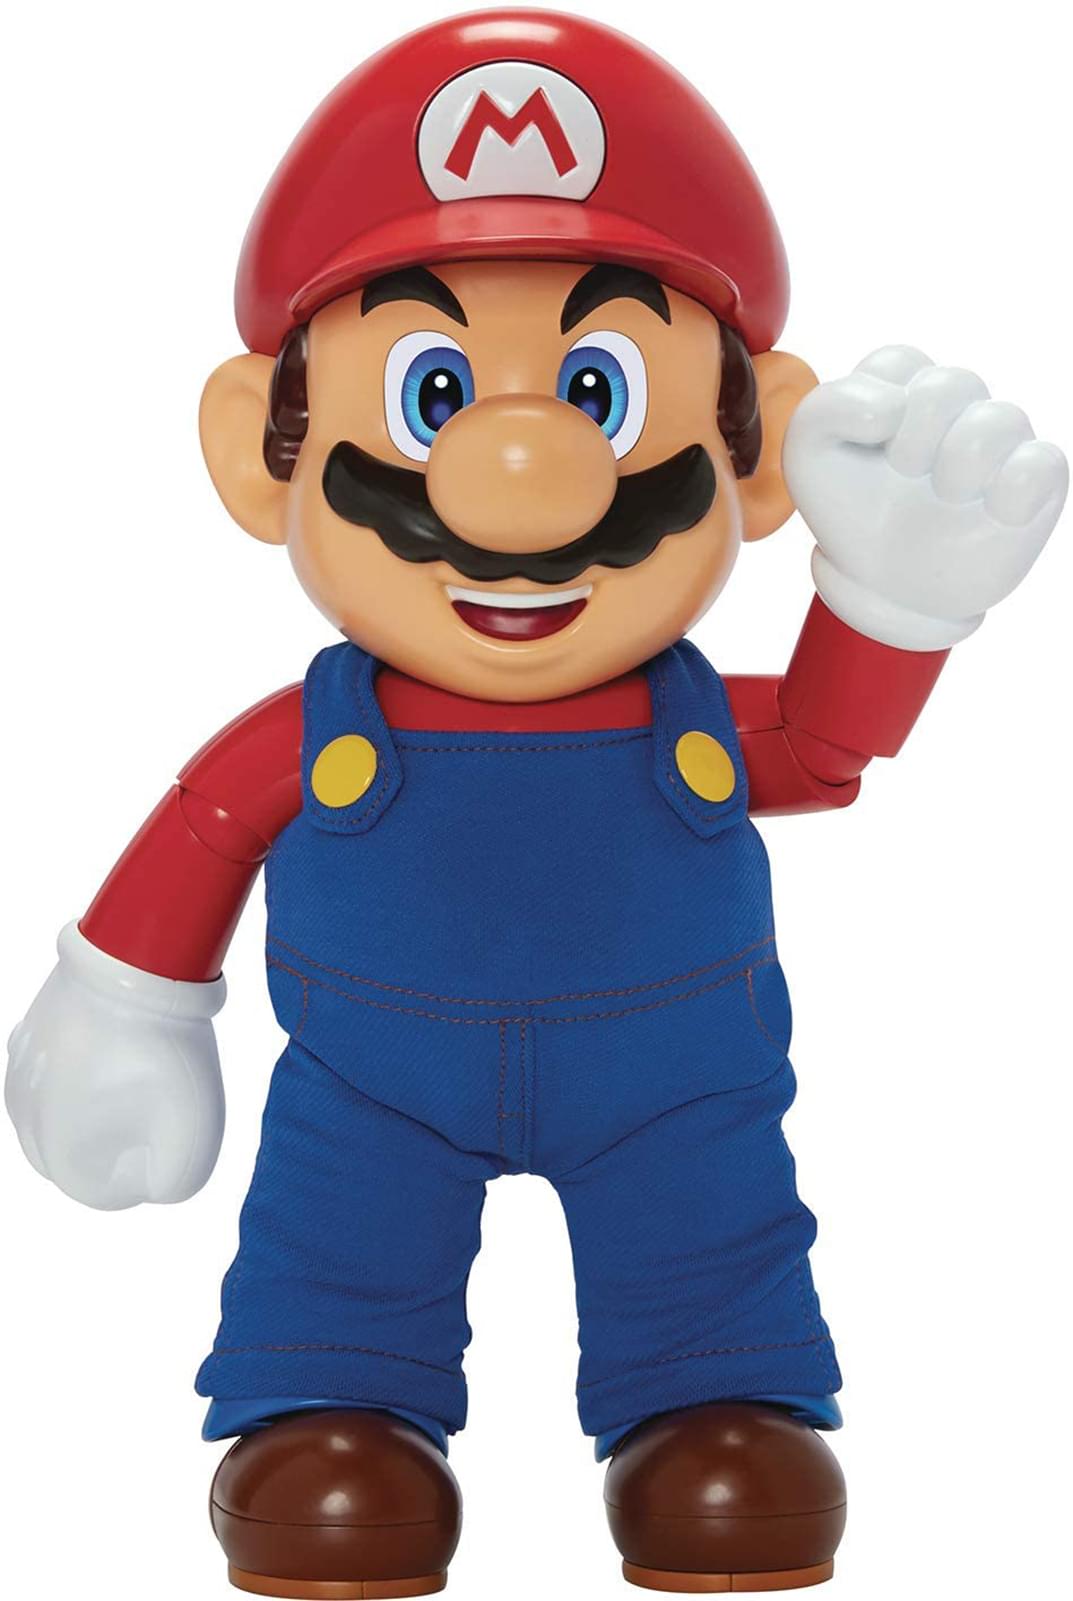 Super Mario It's-A Me, Mario! Talking 12 Inch Figure | 30+ Phrases and Sounds